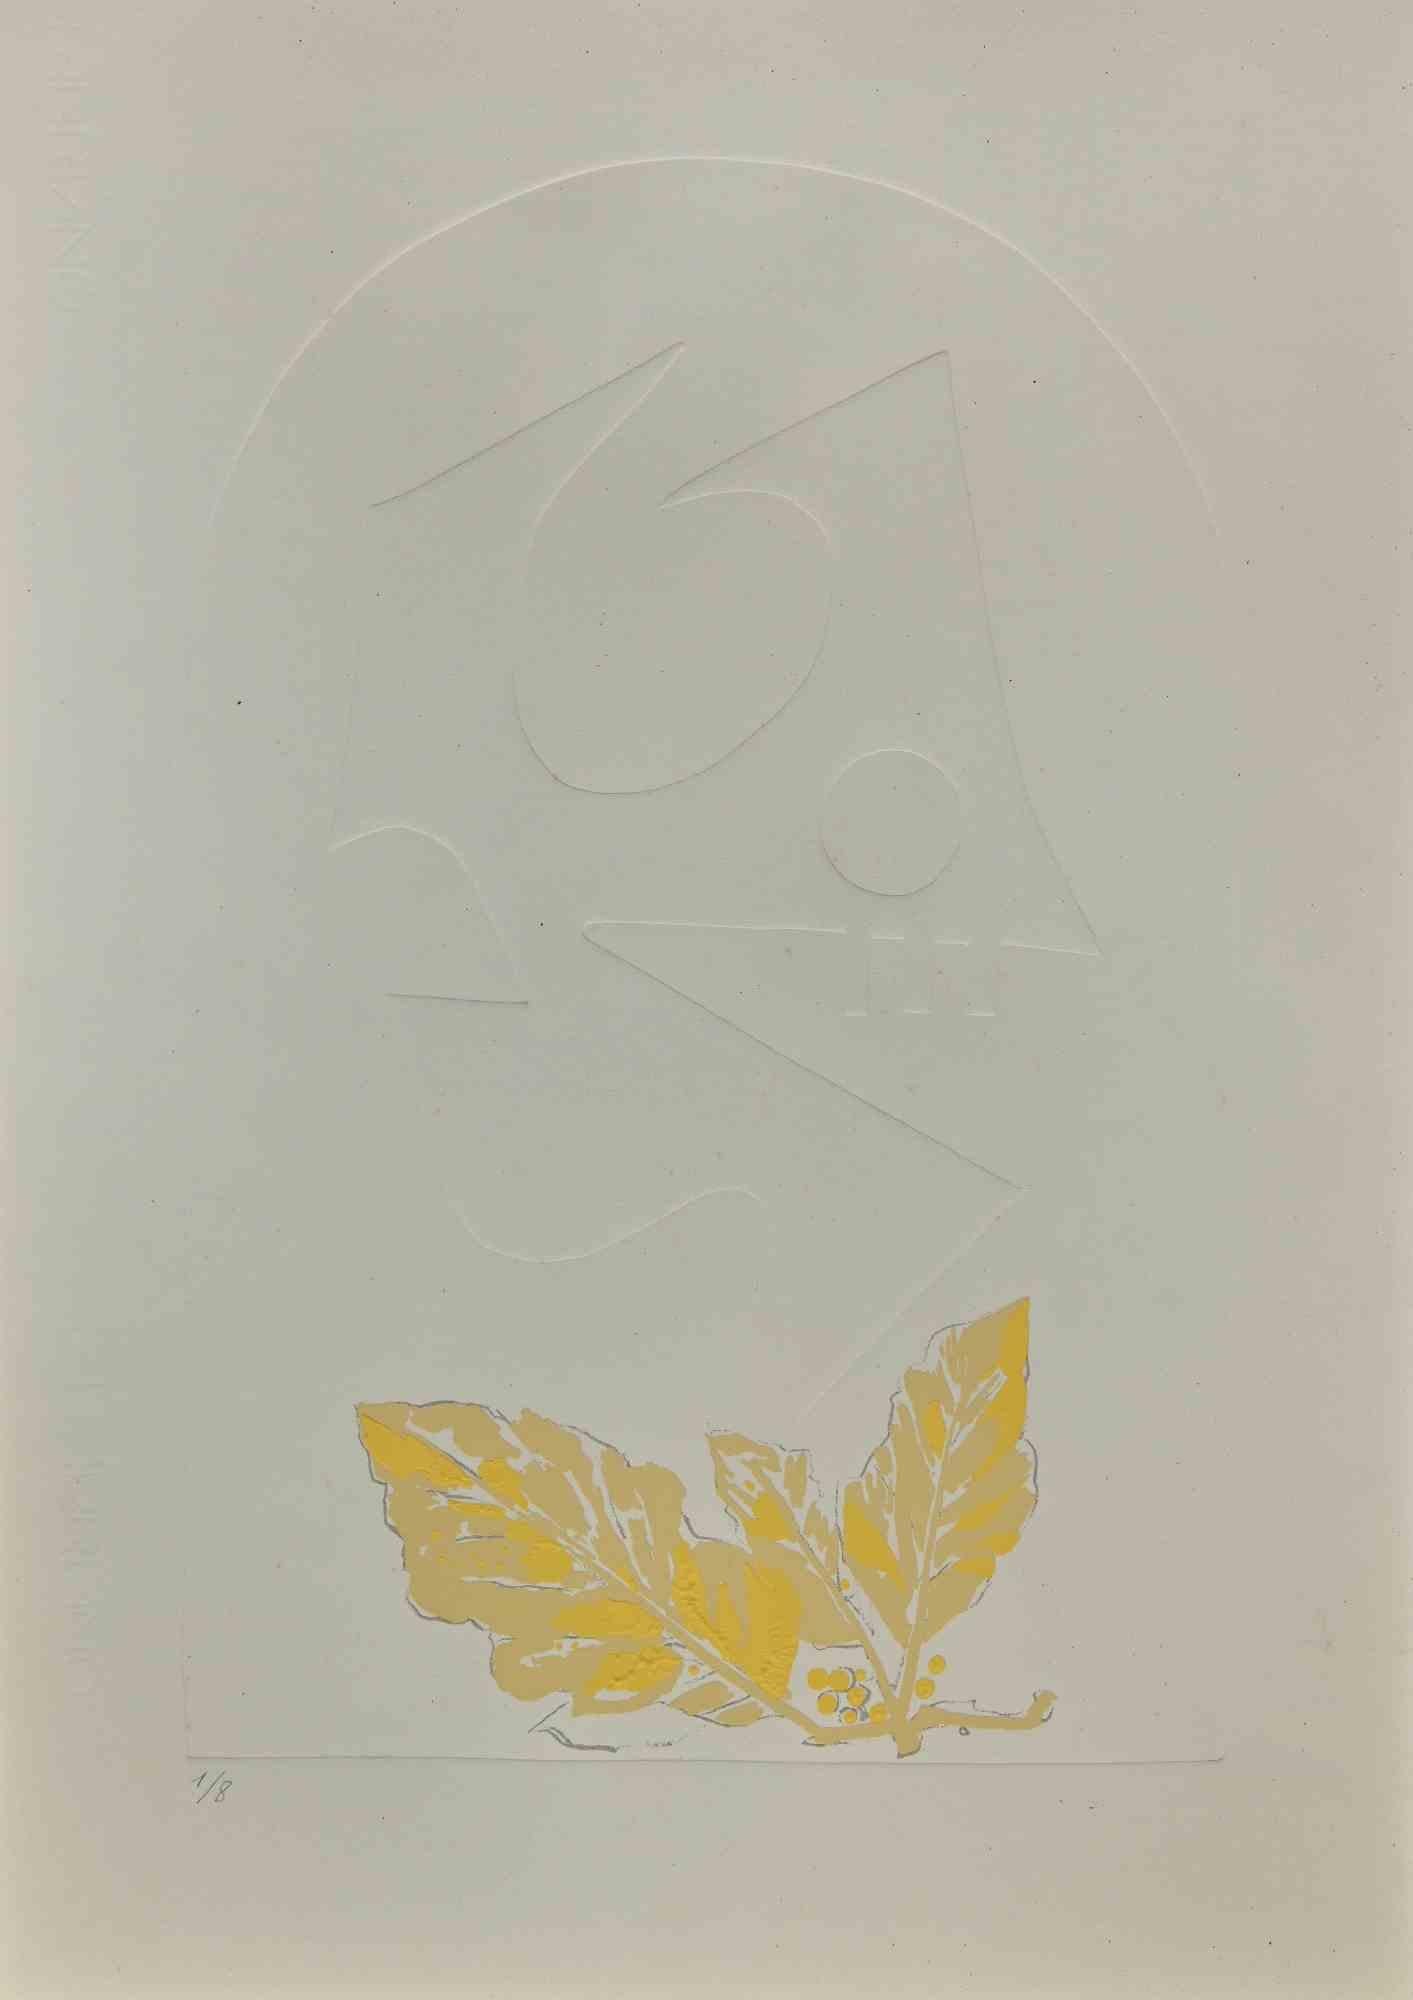 Yellow Leaves is a Screen Print and Embossing realized by Leo Guida in 1970s.

Good condition, no signature.

Artist sensitive to current issues, artistic movements and historical techniques, Leo Guida has been able to weave a productive interview